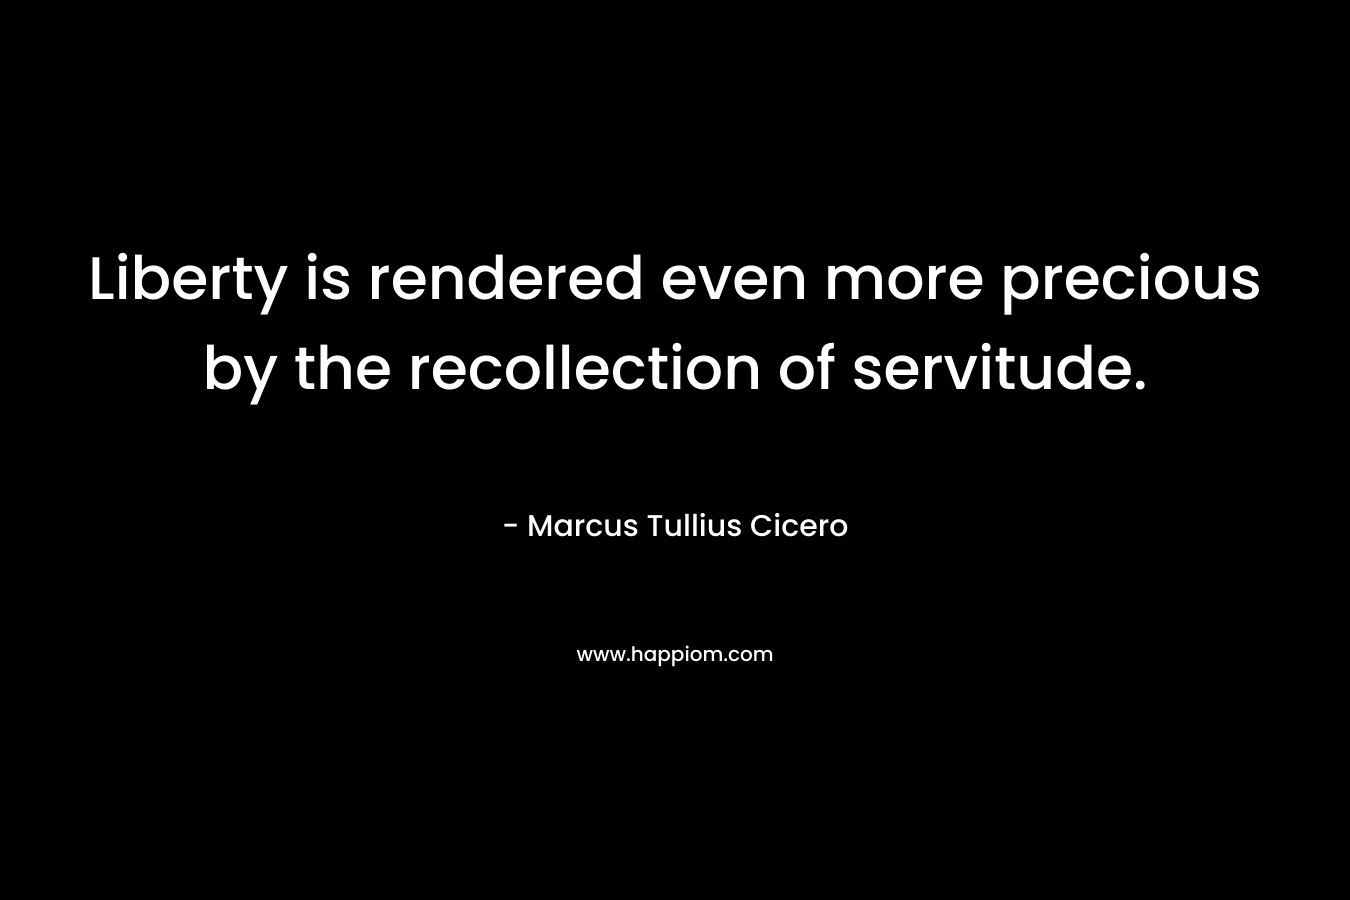 Liberty is rendered even more precious by the recollection of servitude.